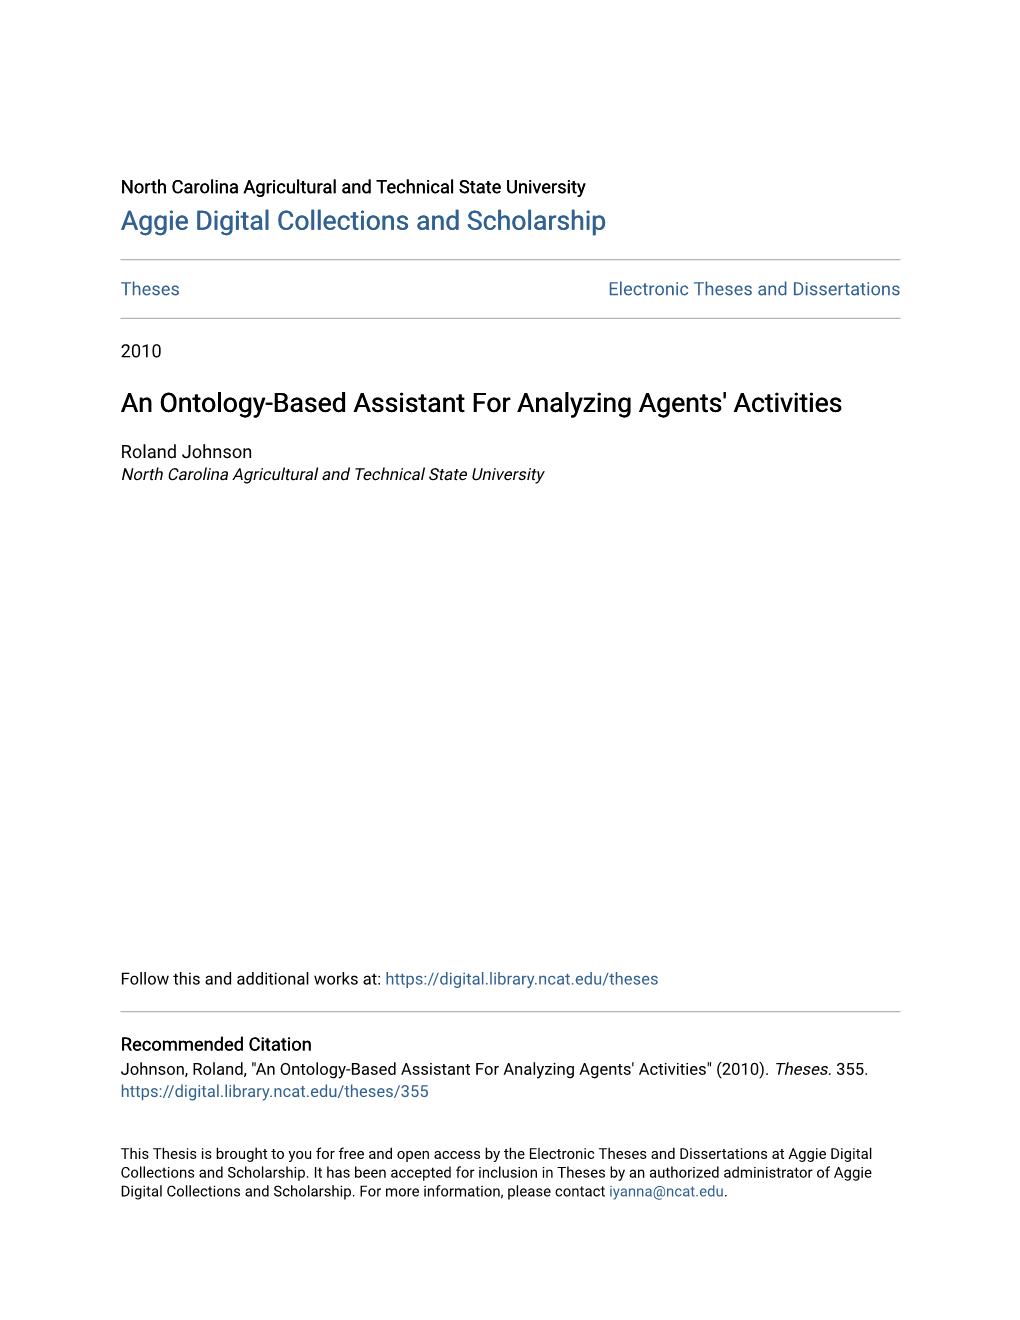 An Ontology-Based Assistant for Analyzing Agents' Activities